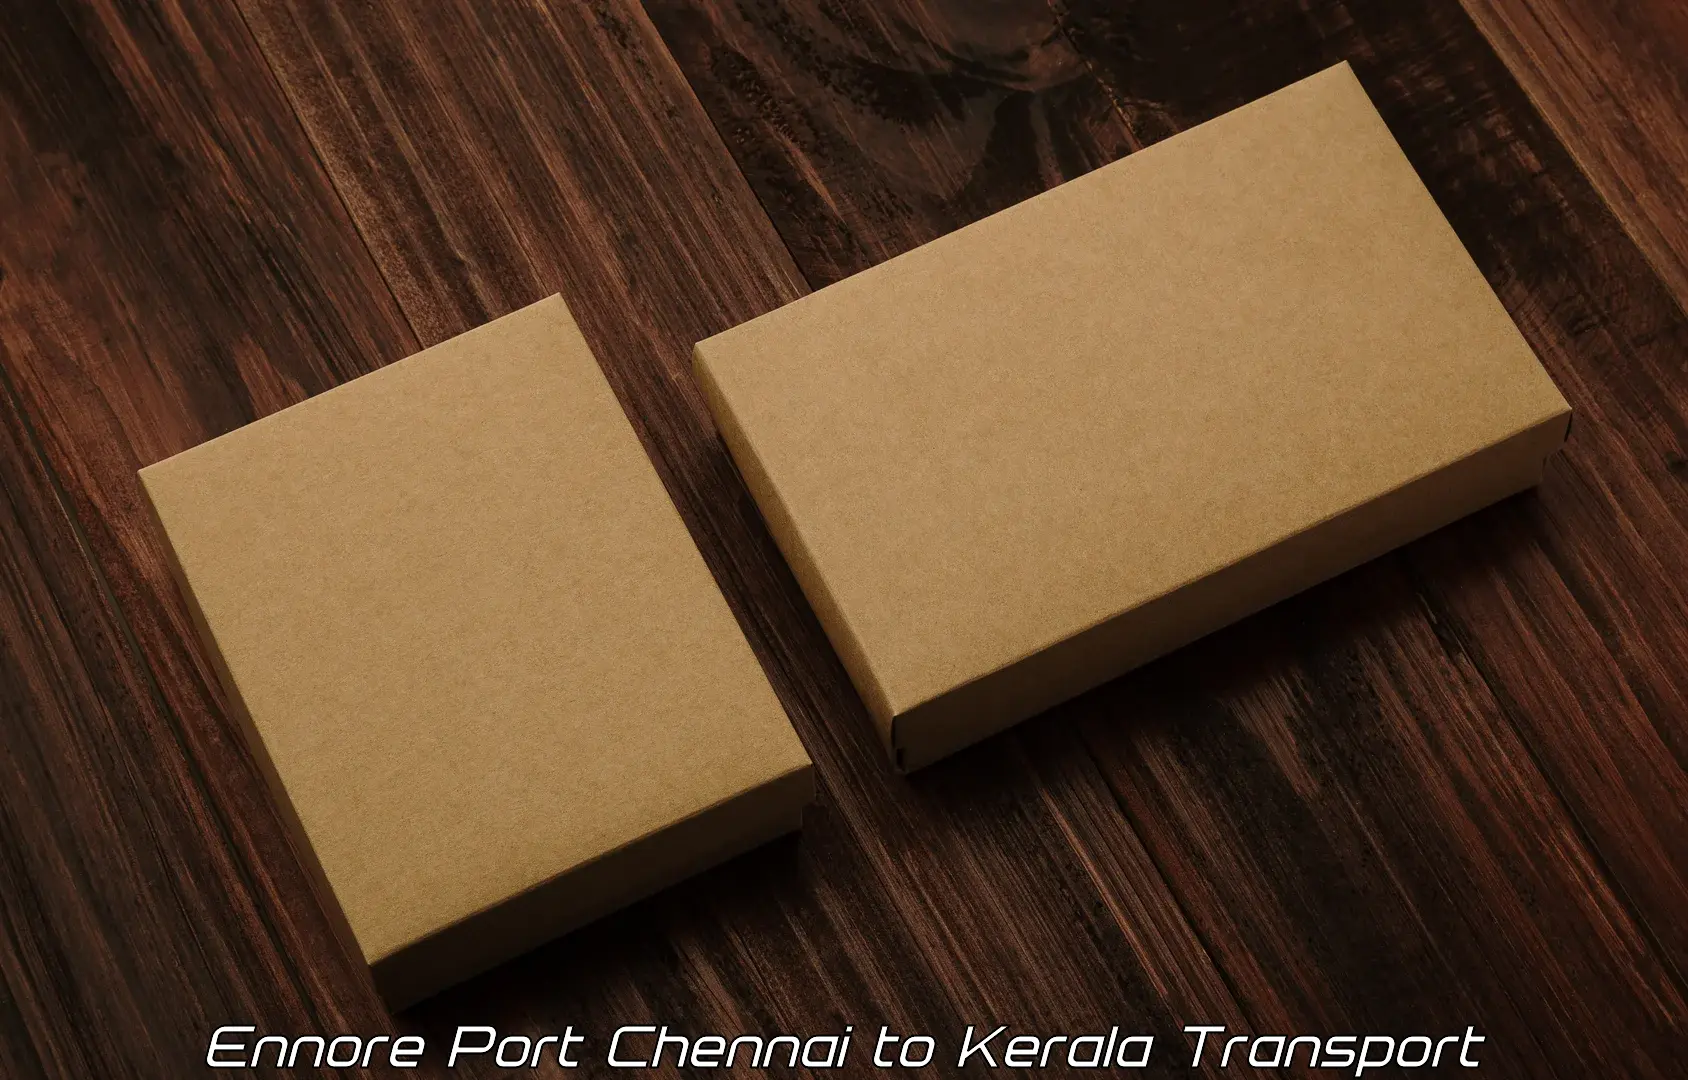 Delivery service Ennore Port Chennai to Ernakulam